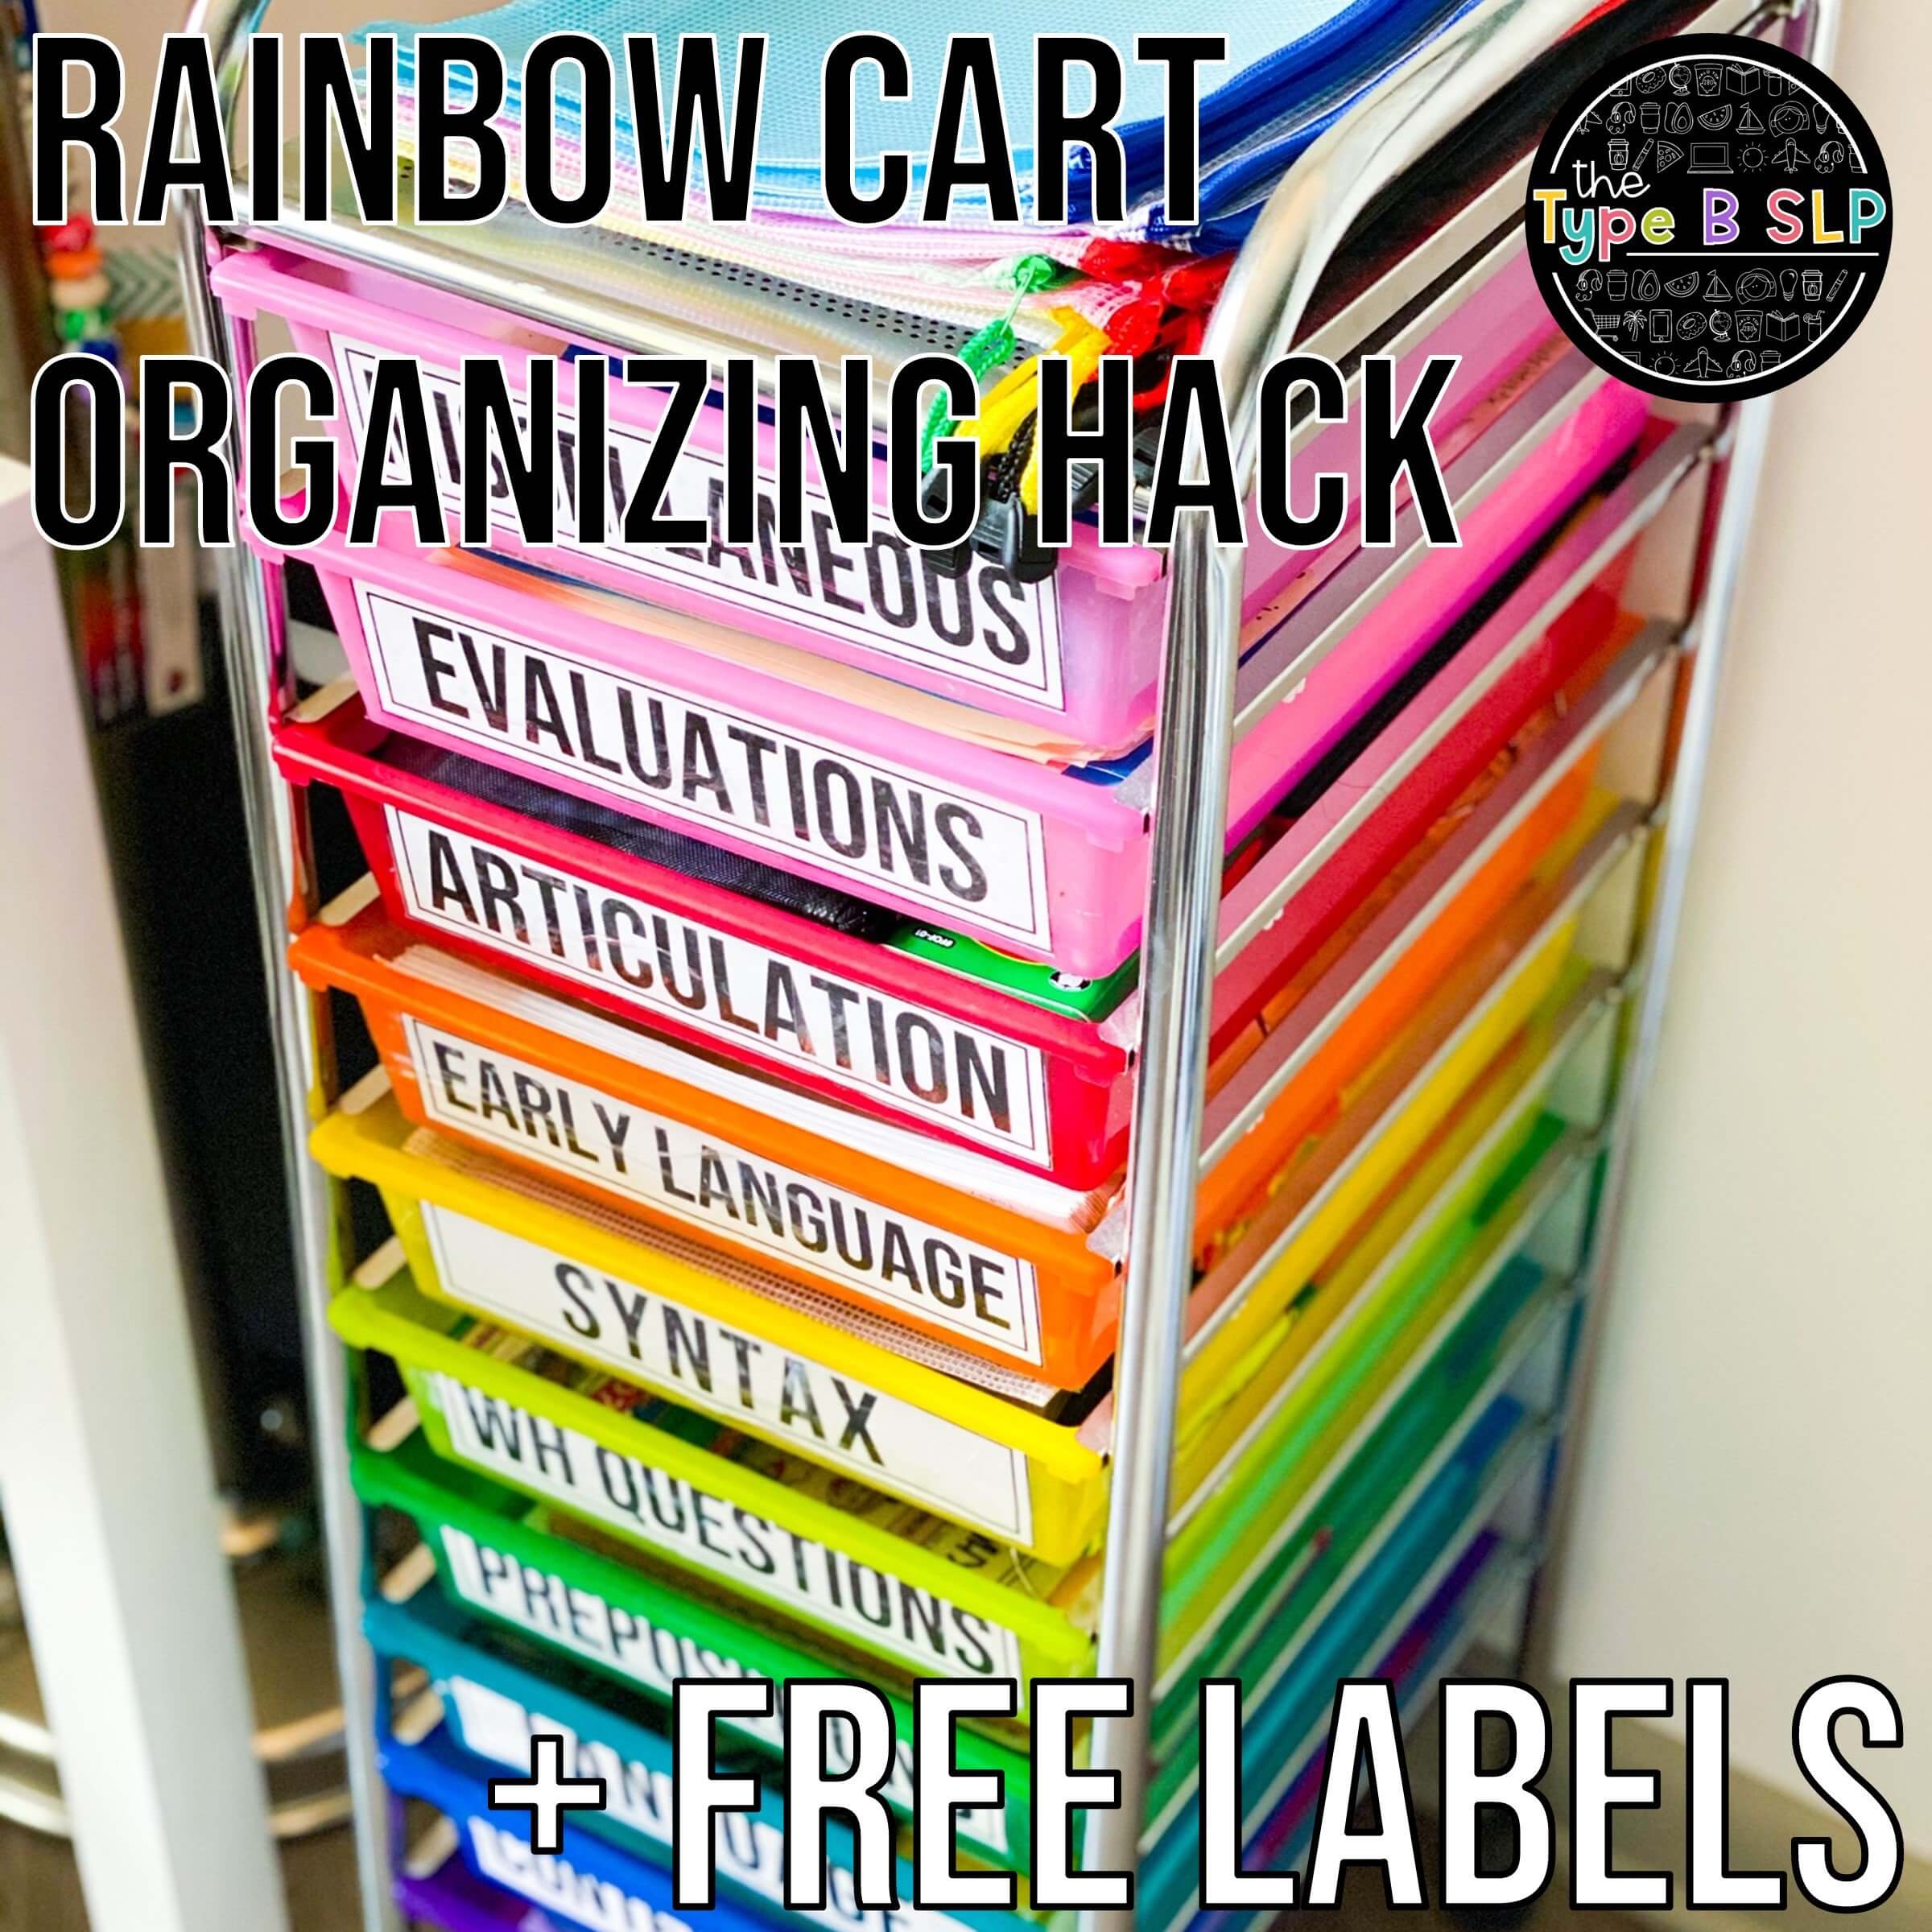 Rainbow Cart Storage Hack for SLPs (+ free labels!)